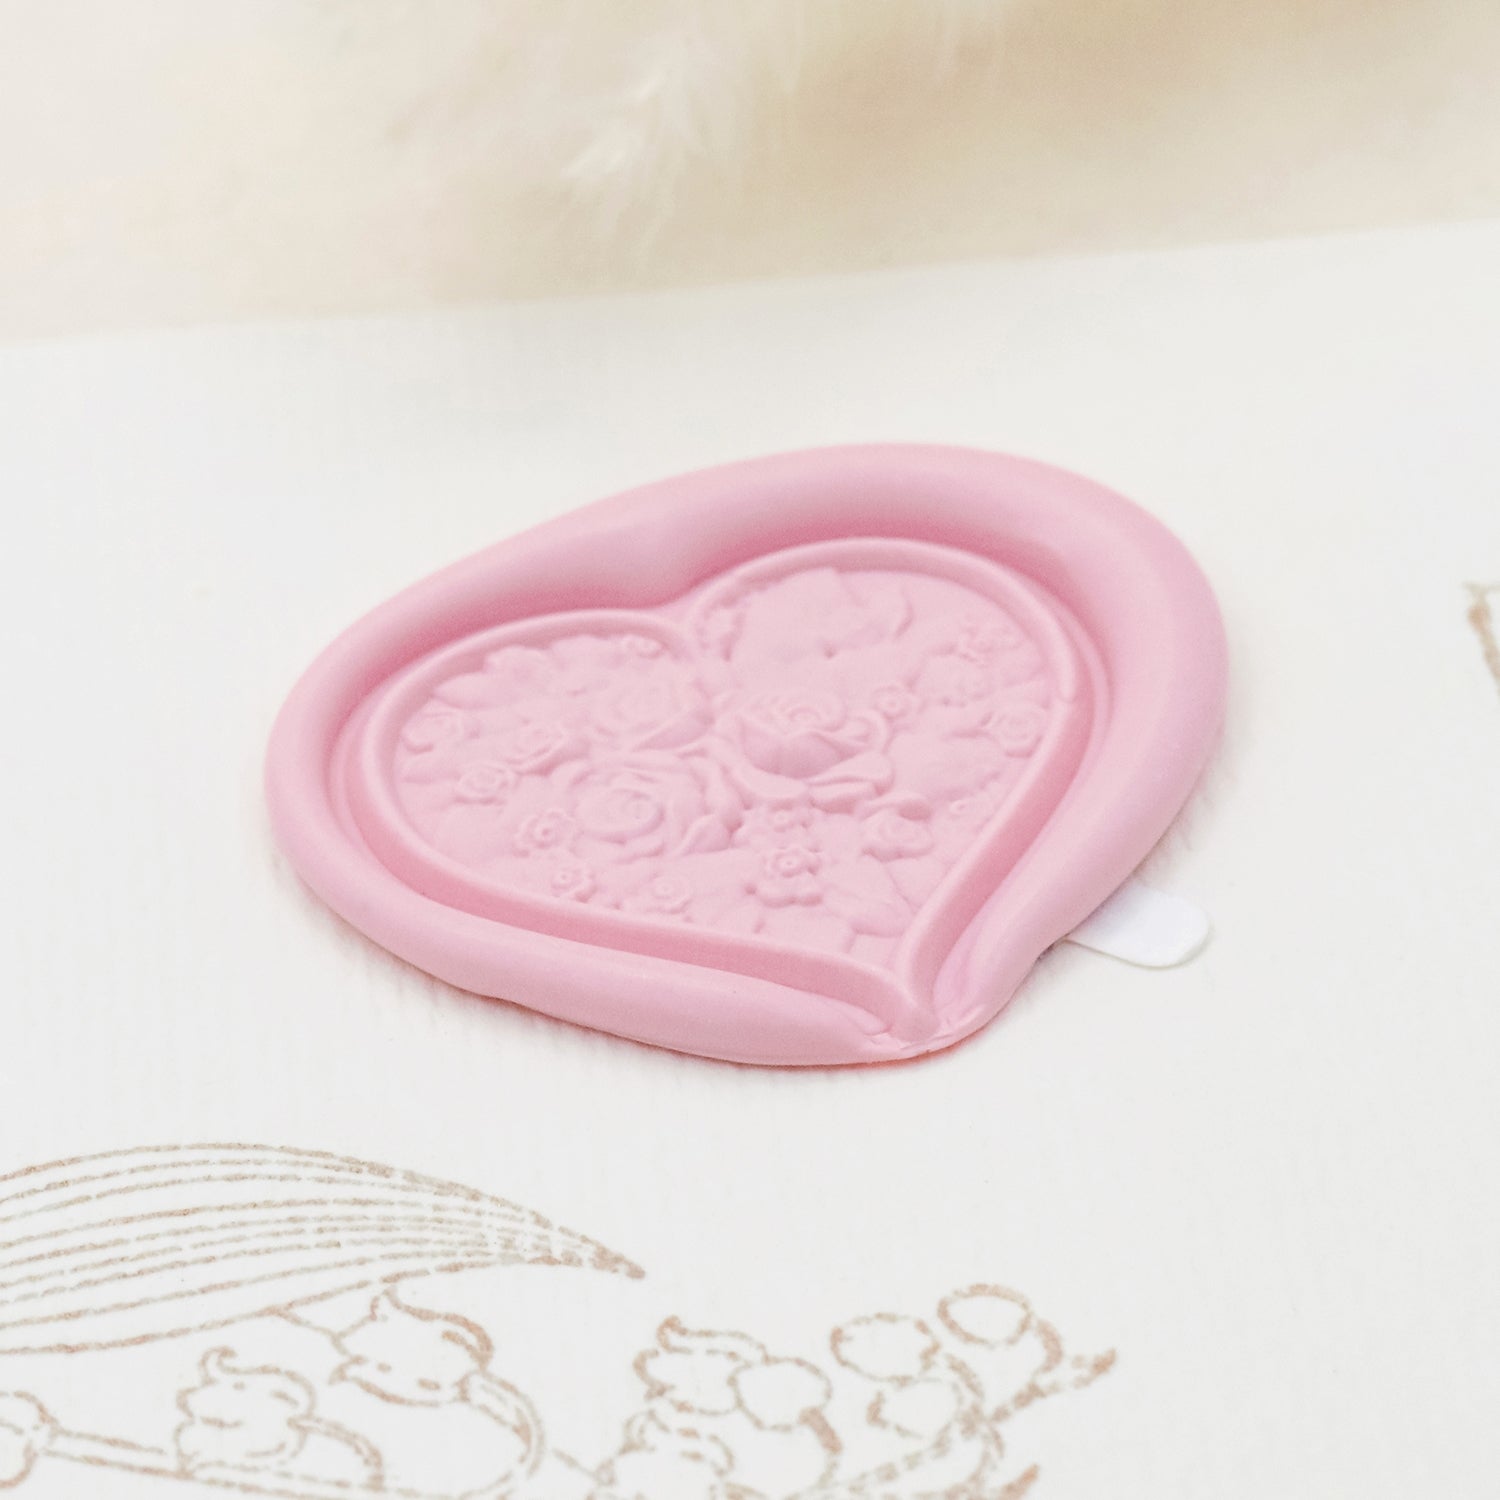 Wax seal stickers - With Love heart wedding envelope seals self adhesive